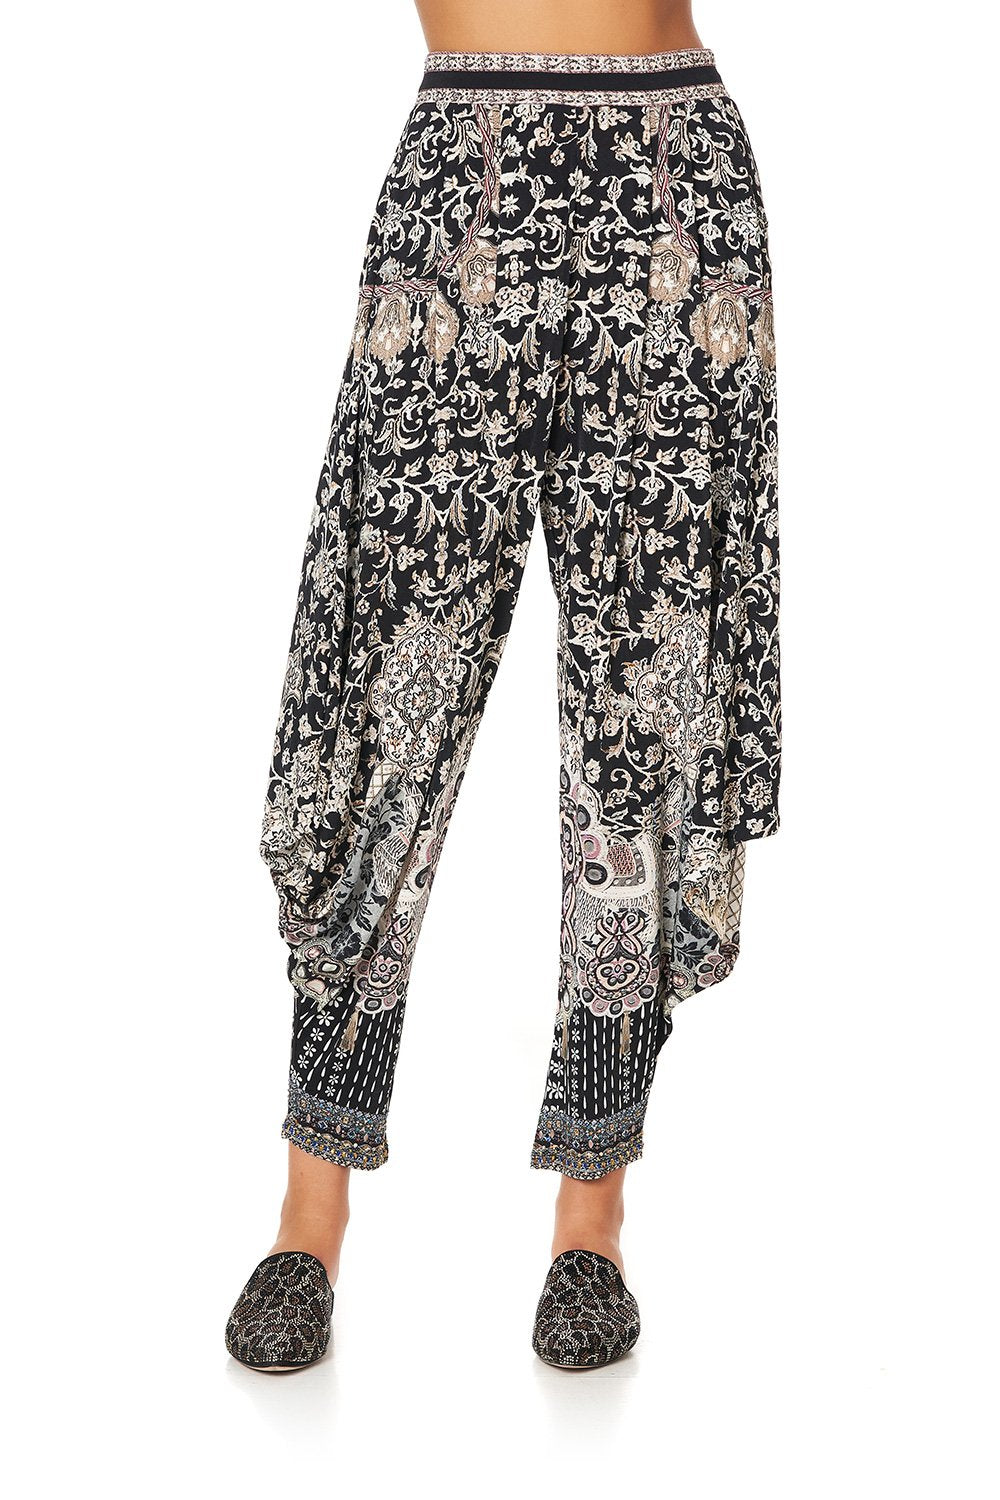 JERSEY DRAPE PANT WITH POCKET DUST HER OFF